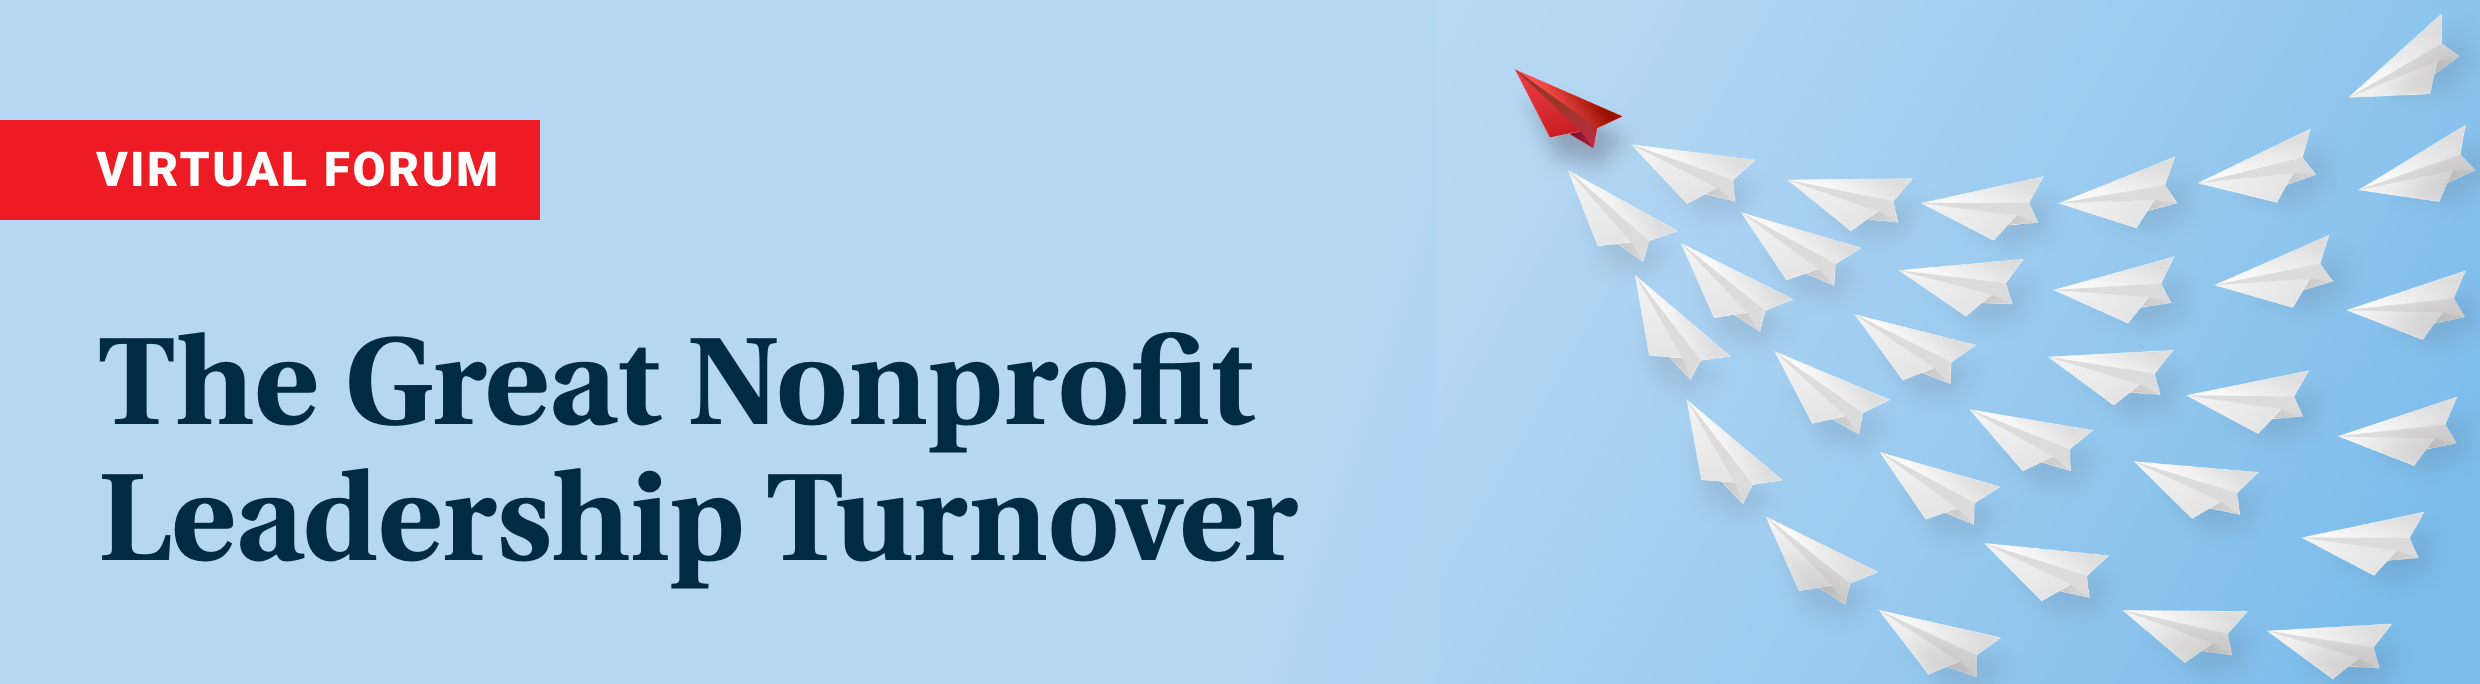 The Great Nonprofit Turnover